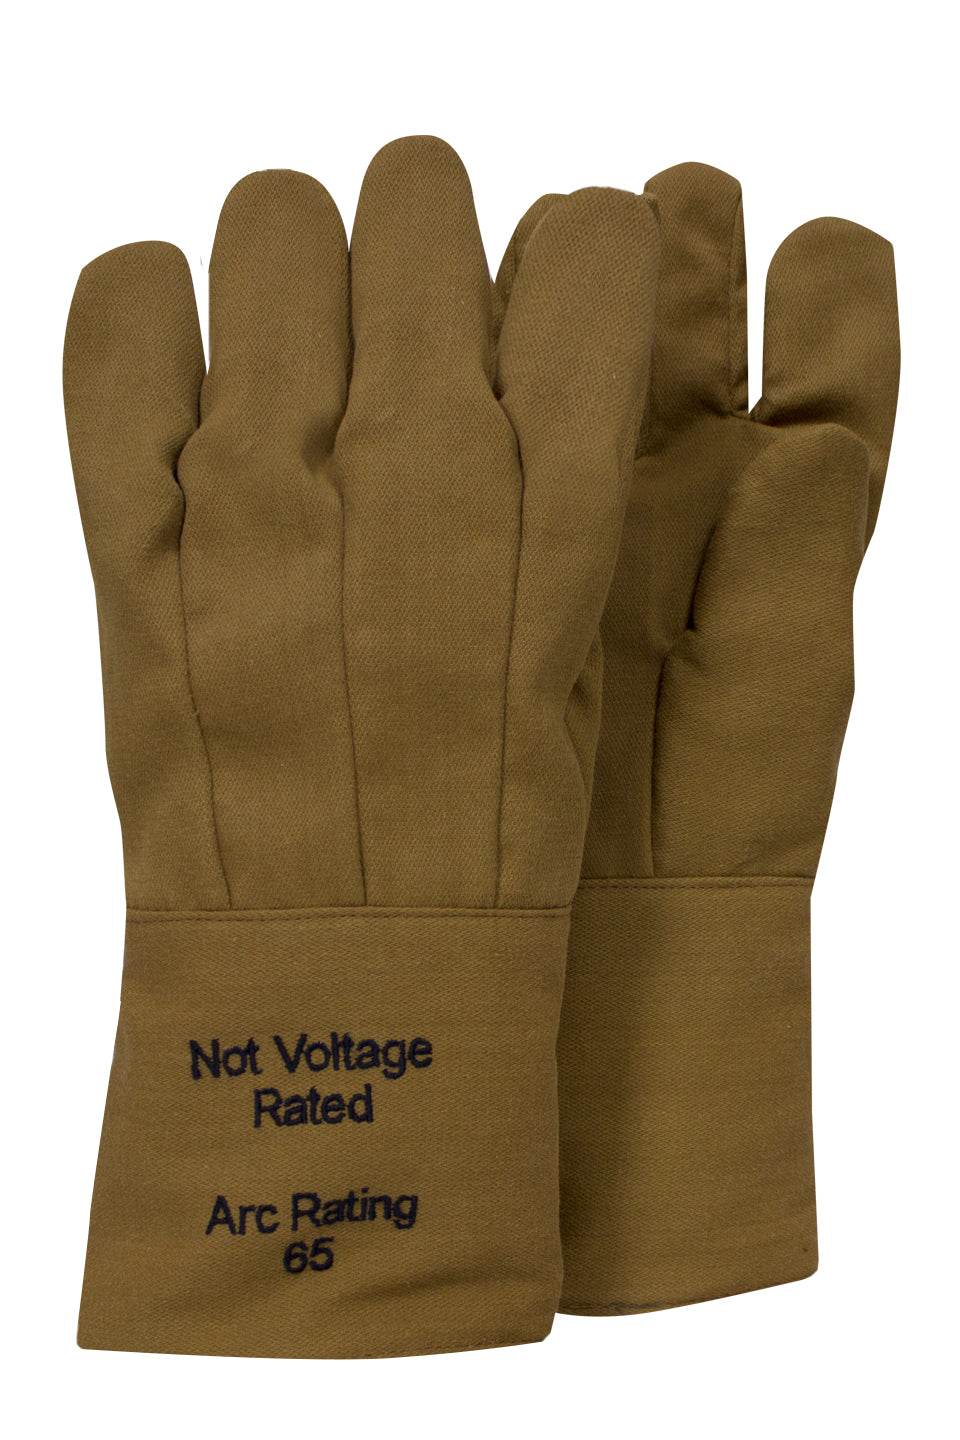 Enespro ArcGuard 65 cal Arc Rated Gloves